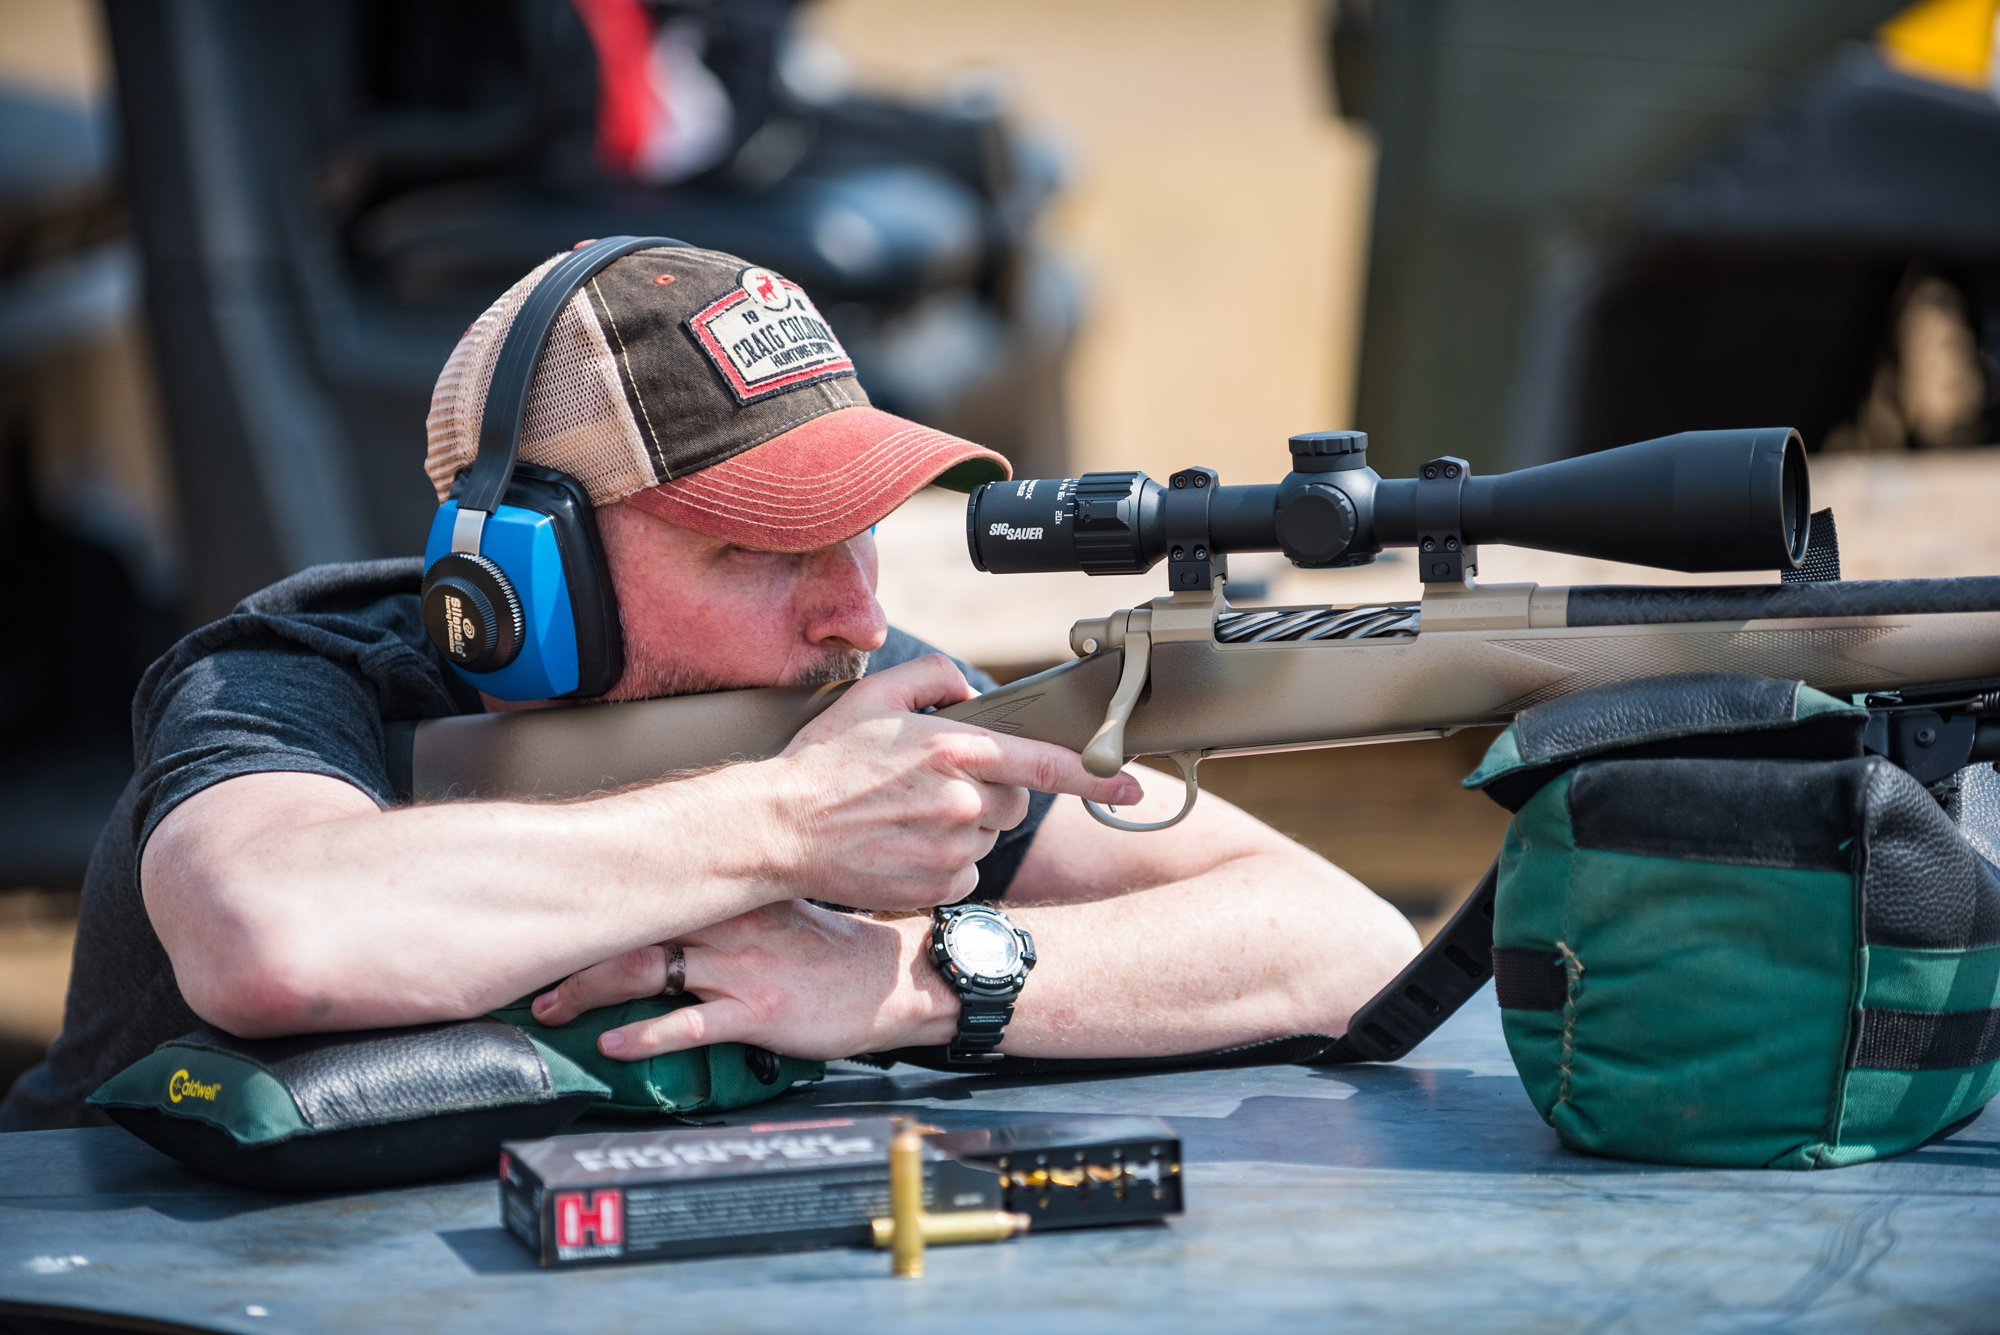 Darren Choate checking his zero at 100 yards with the Sig Sauer BDX Riflescope